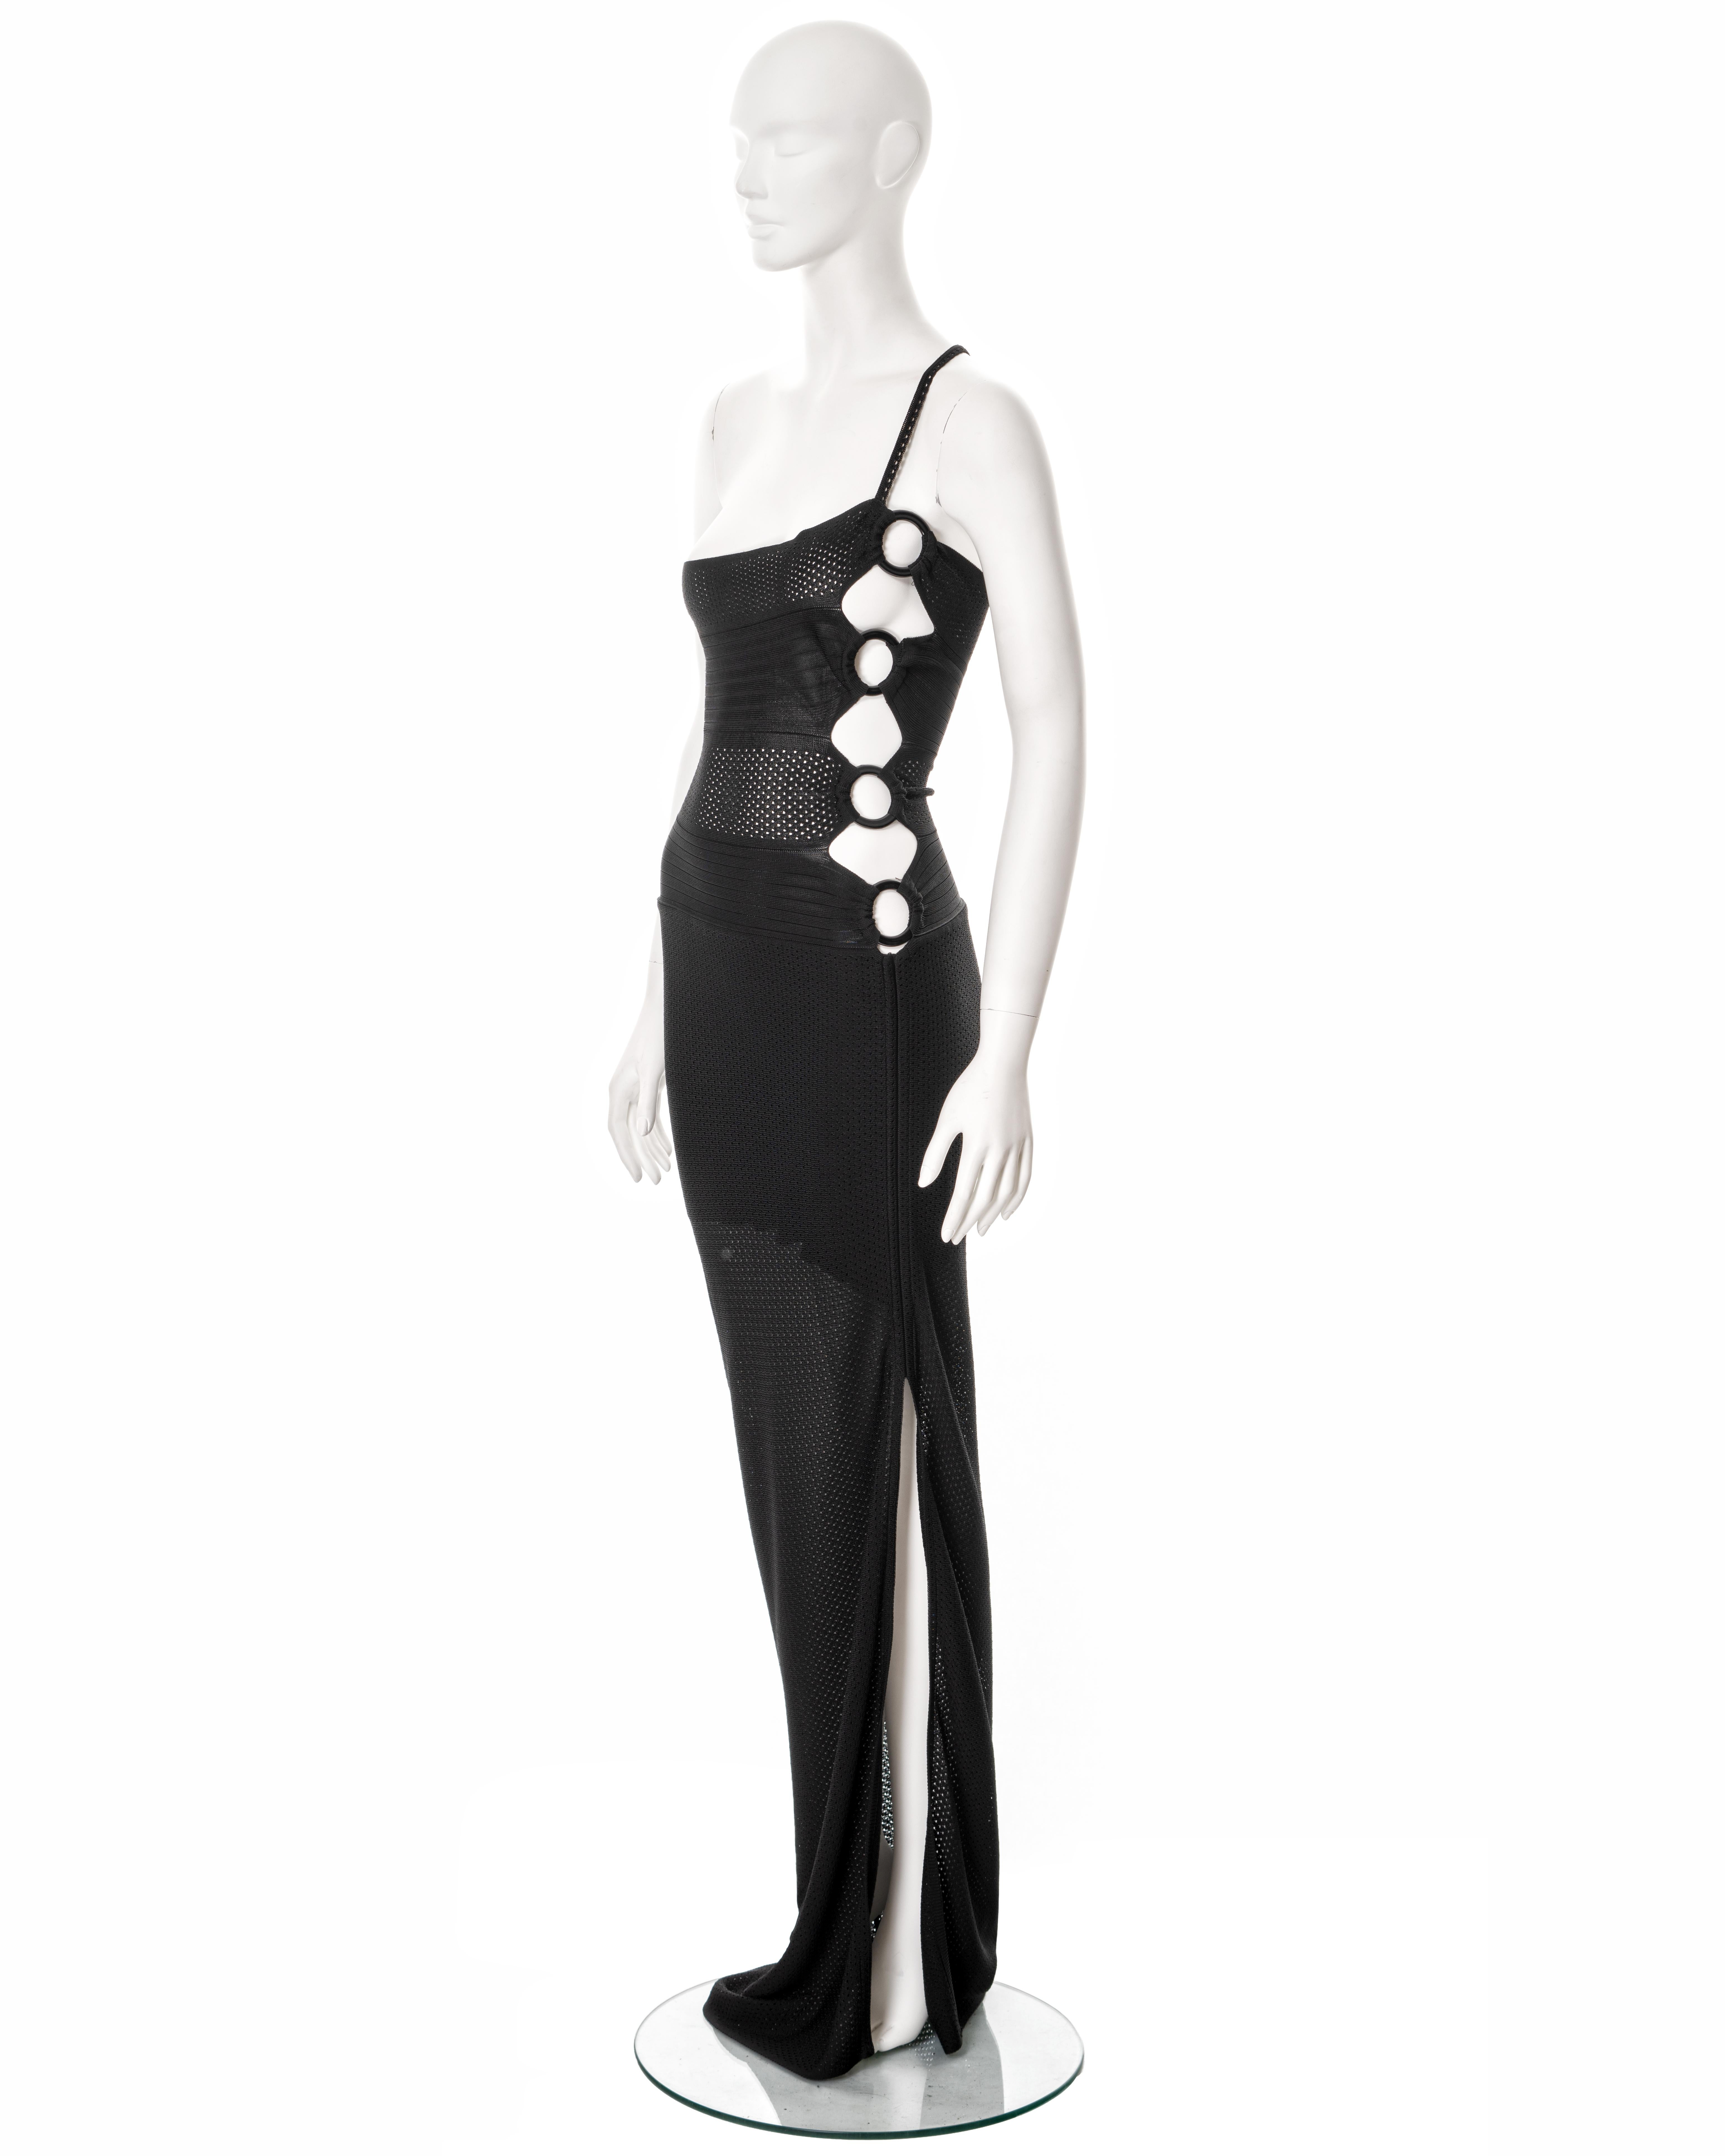 Women's Christian Dior by John Galliano black perforated evening dress, ss 2002